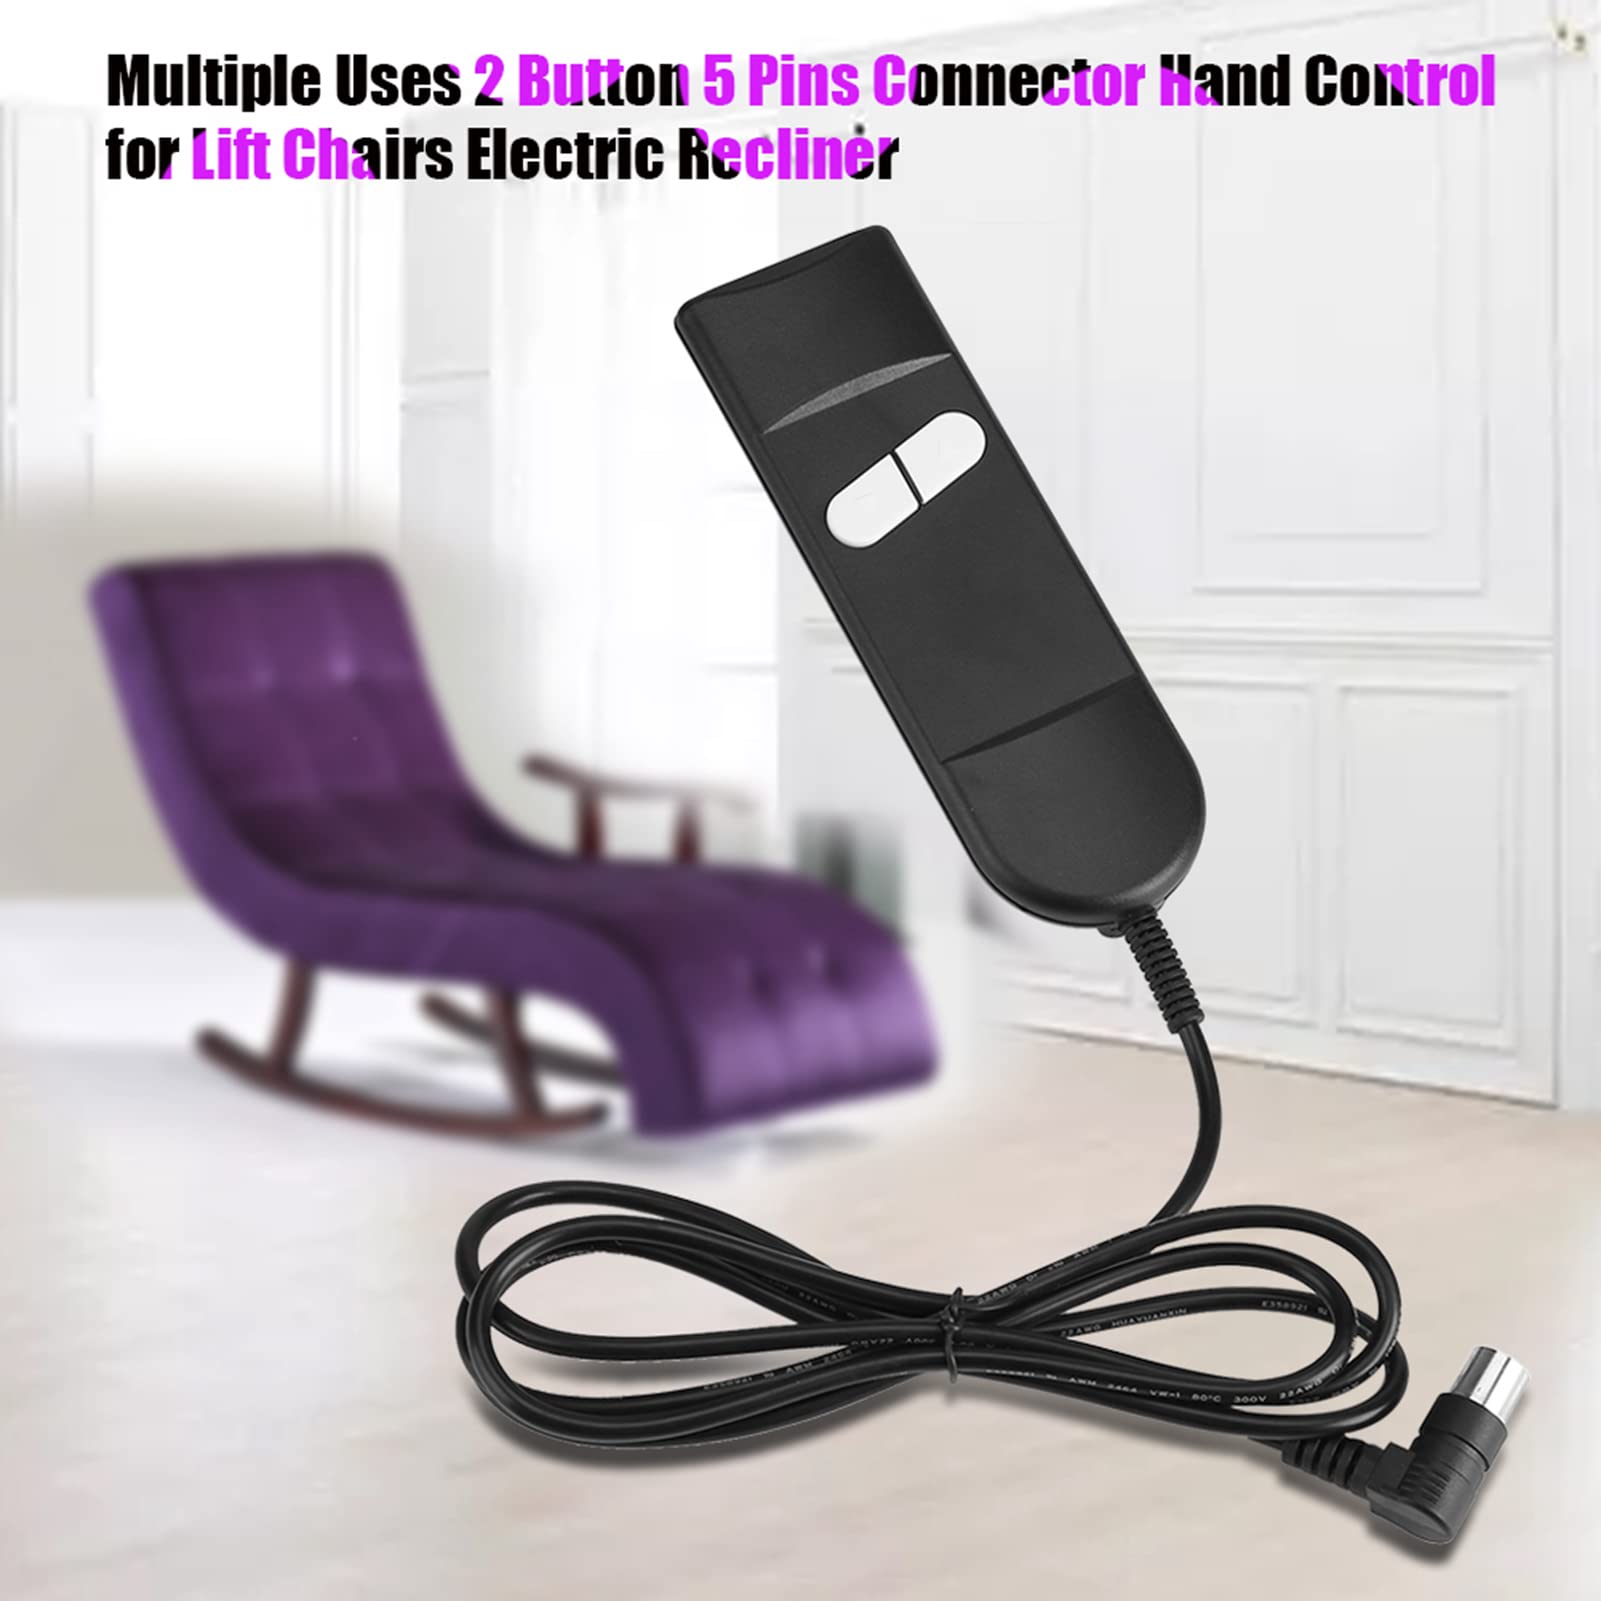 FTVOGUE Electric Recliner Connector Multiple Uses 2 Button 5 Pins Hand Control for Lift Chairs